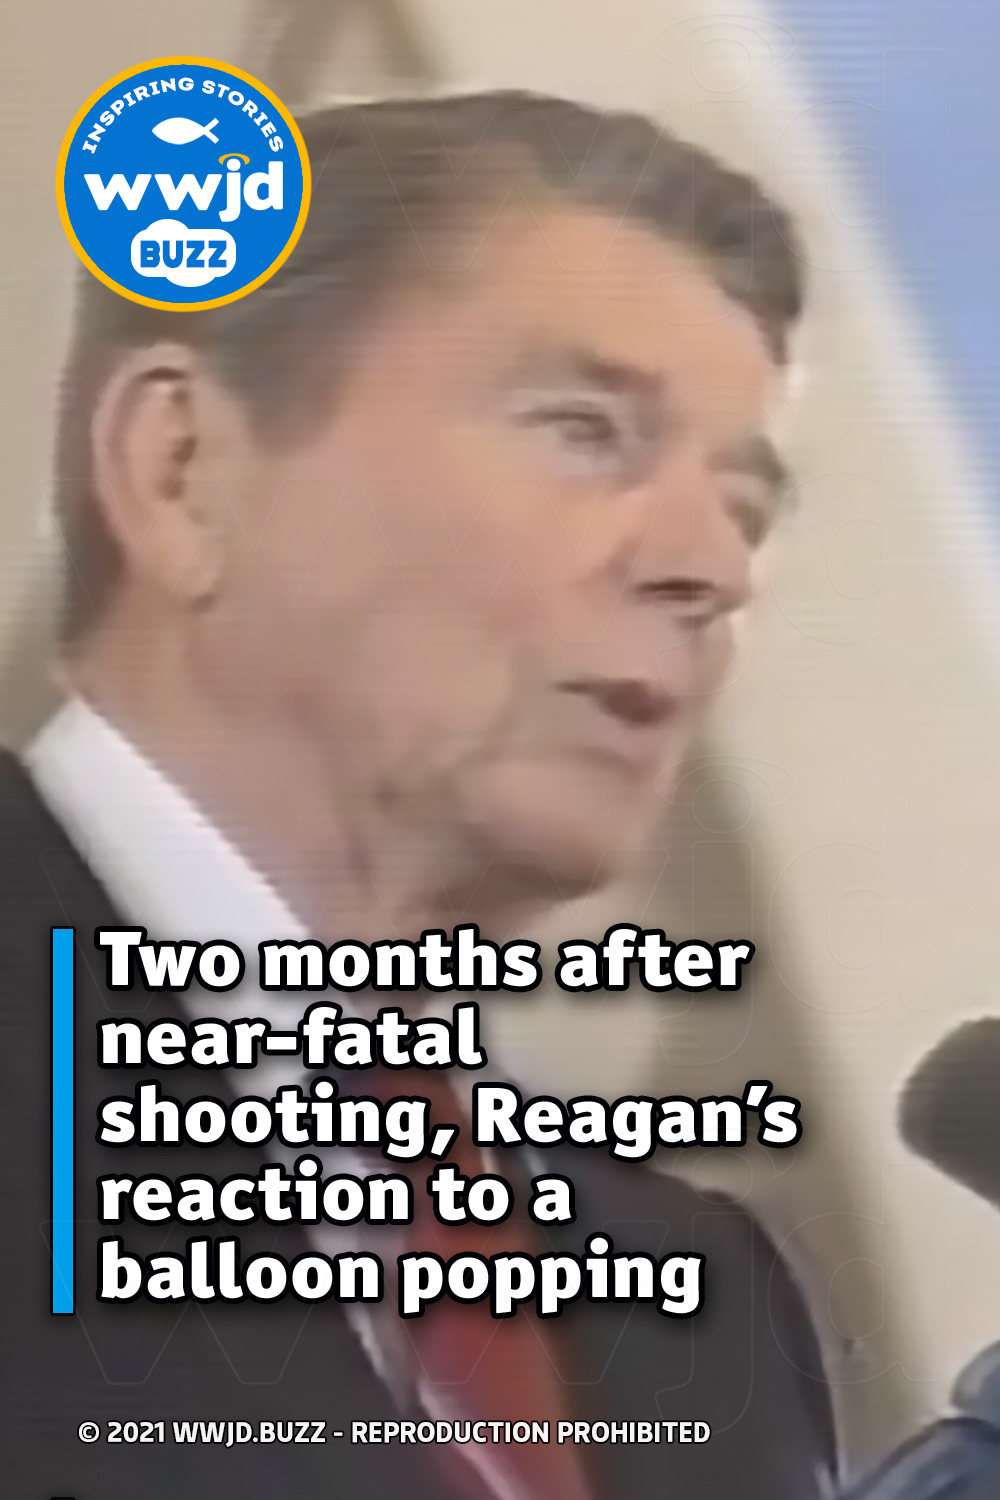 Two months after near-fatal shooting, Reagan’s reaction to a balloon popping